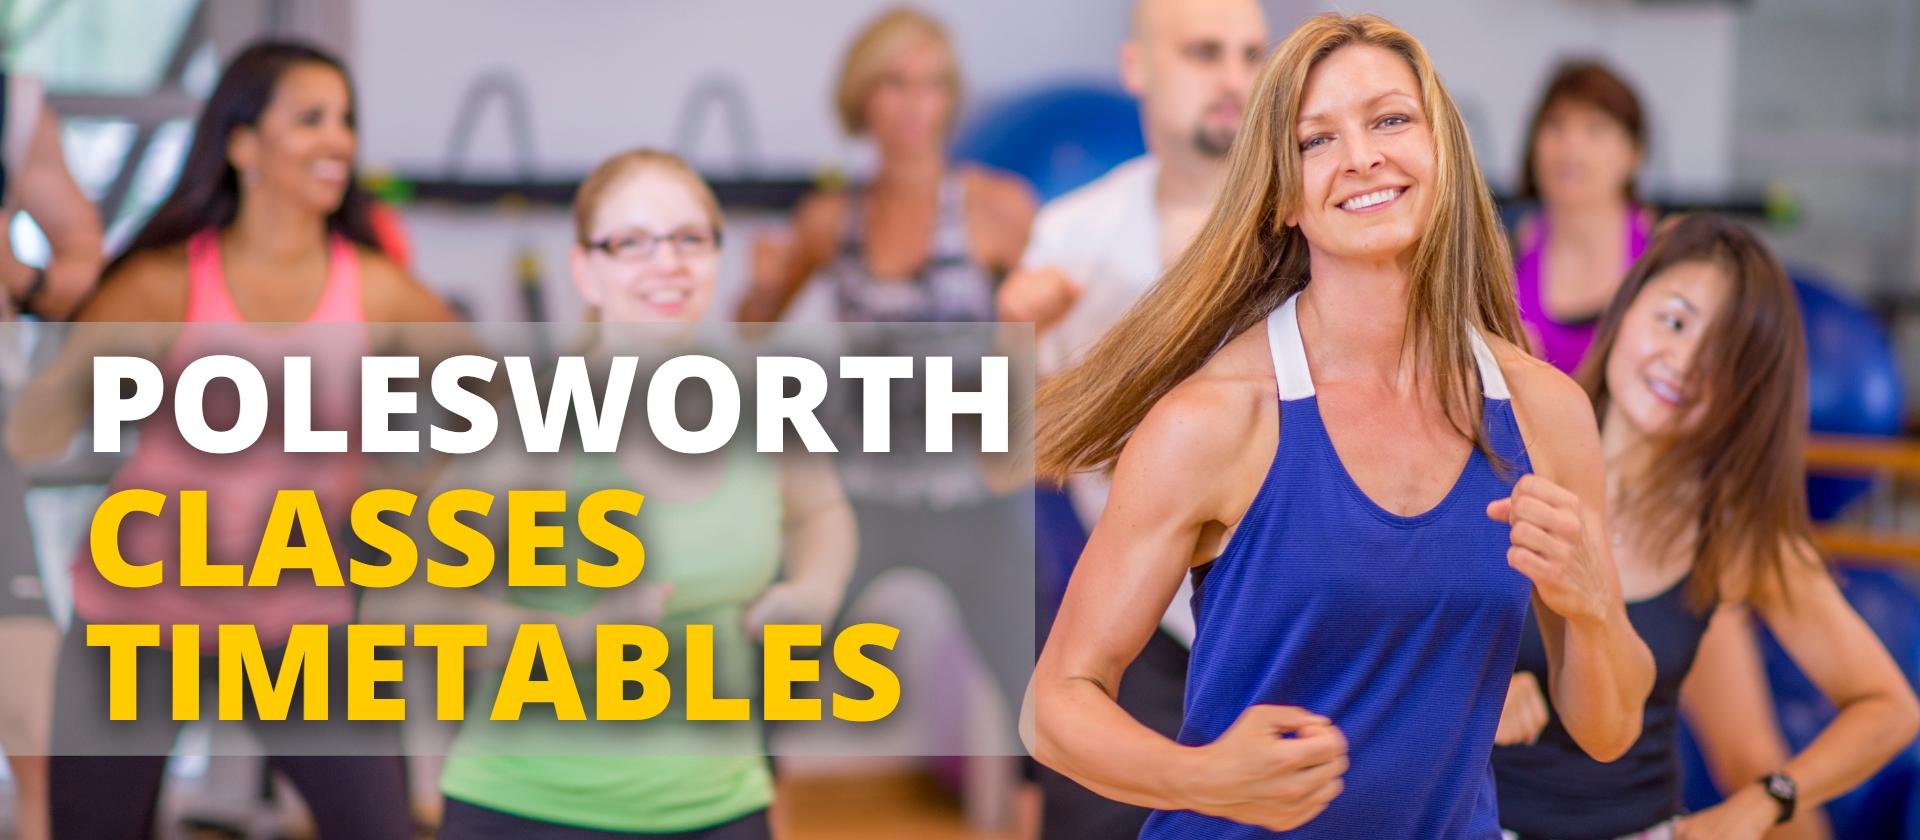 North Warwickshire leisure, Polesworth exercise and fitness classes timetables Atherstone